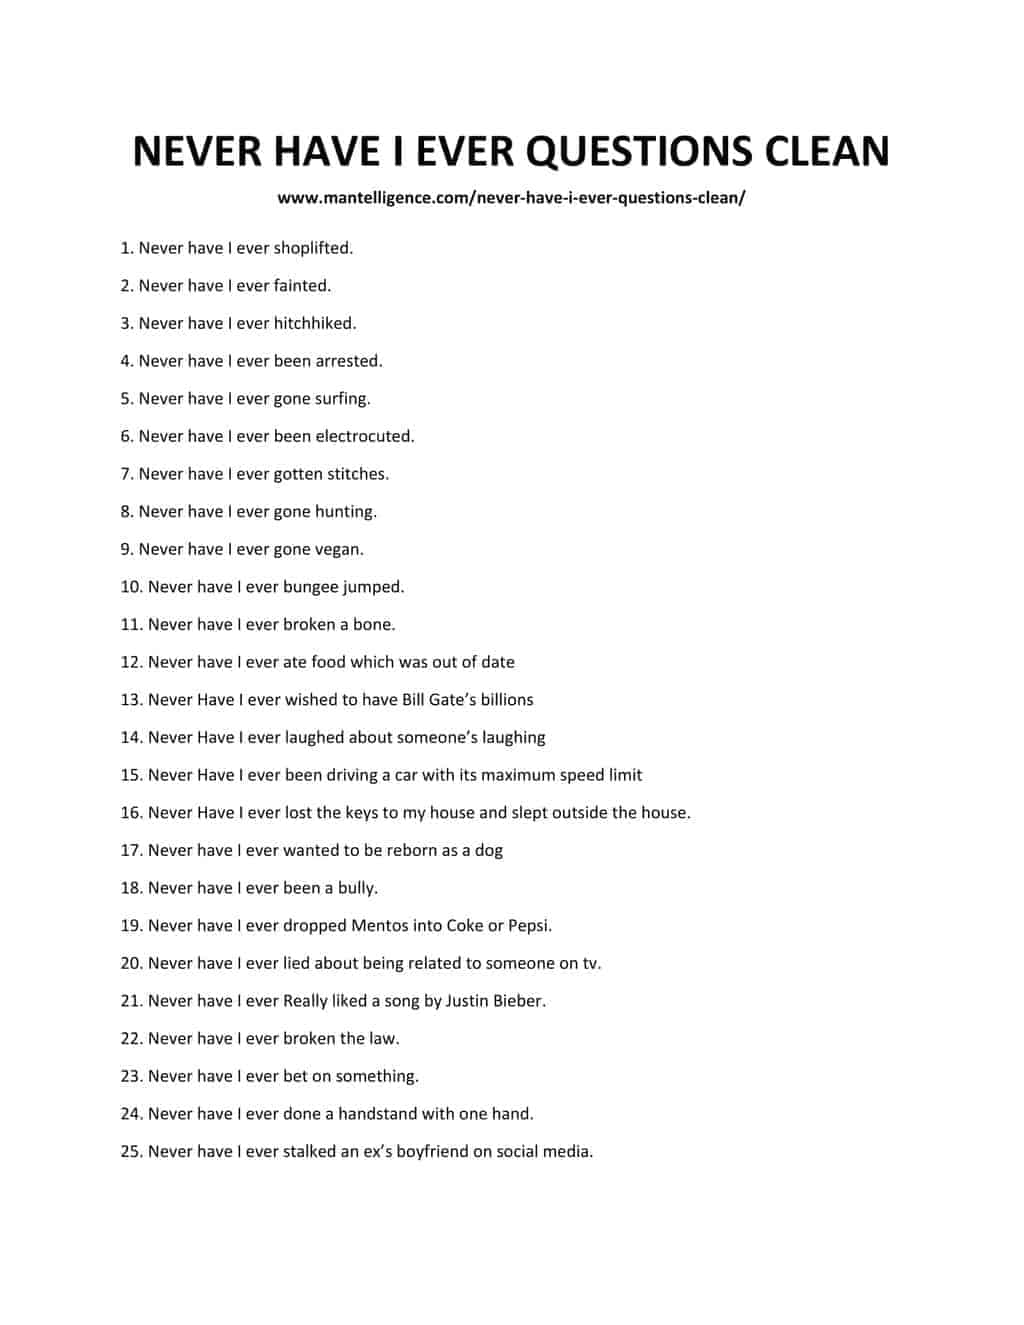 NEVER_HAVE_I_EVER_QUESTIONS_CLEAN-1[1]